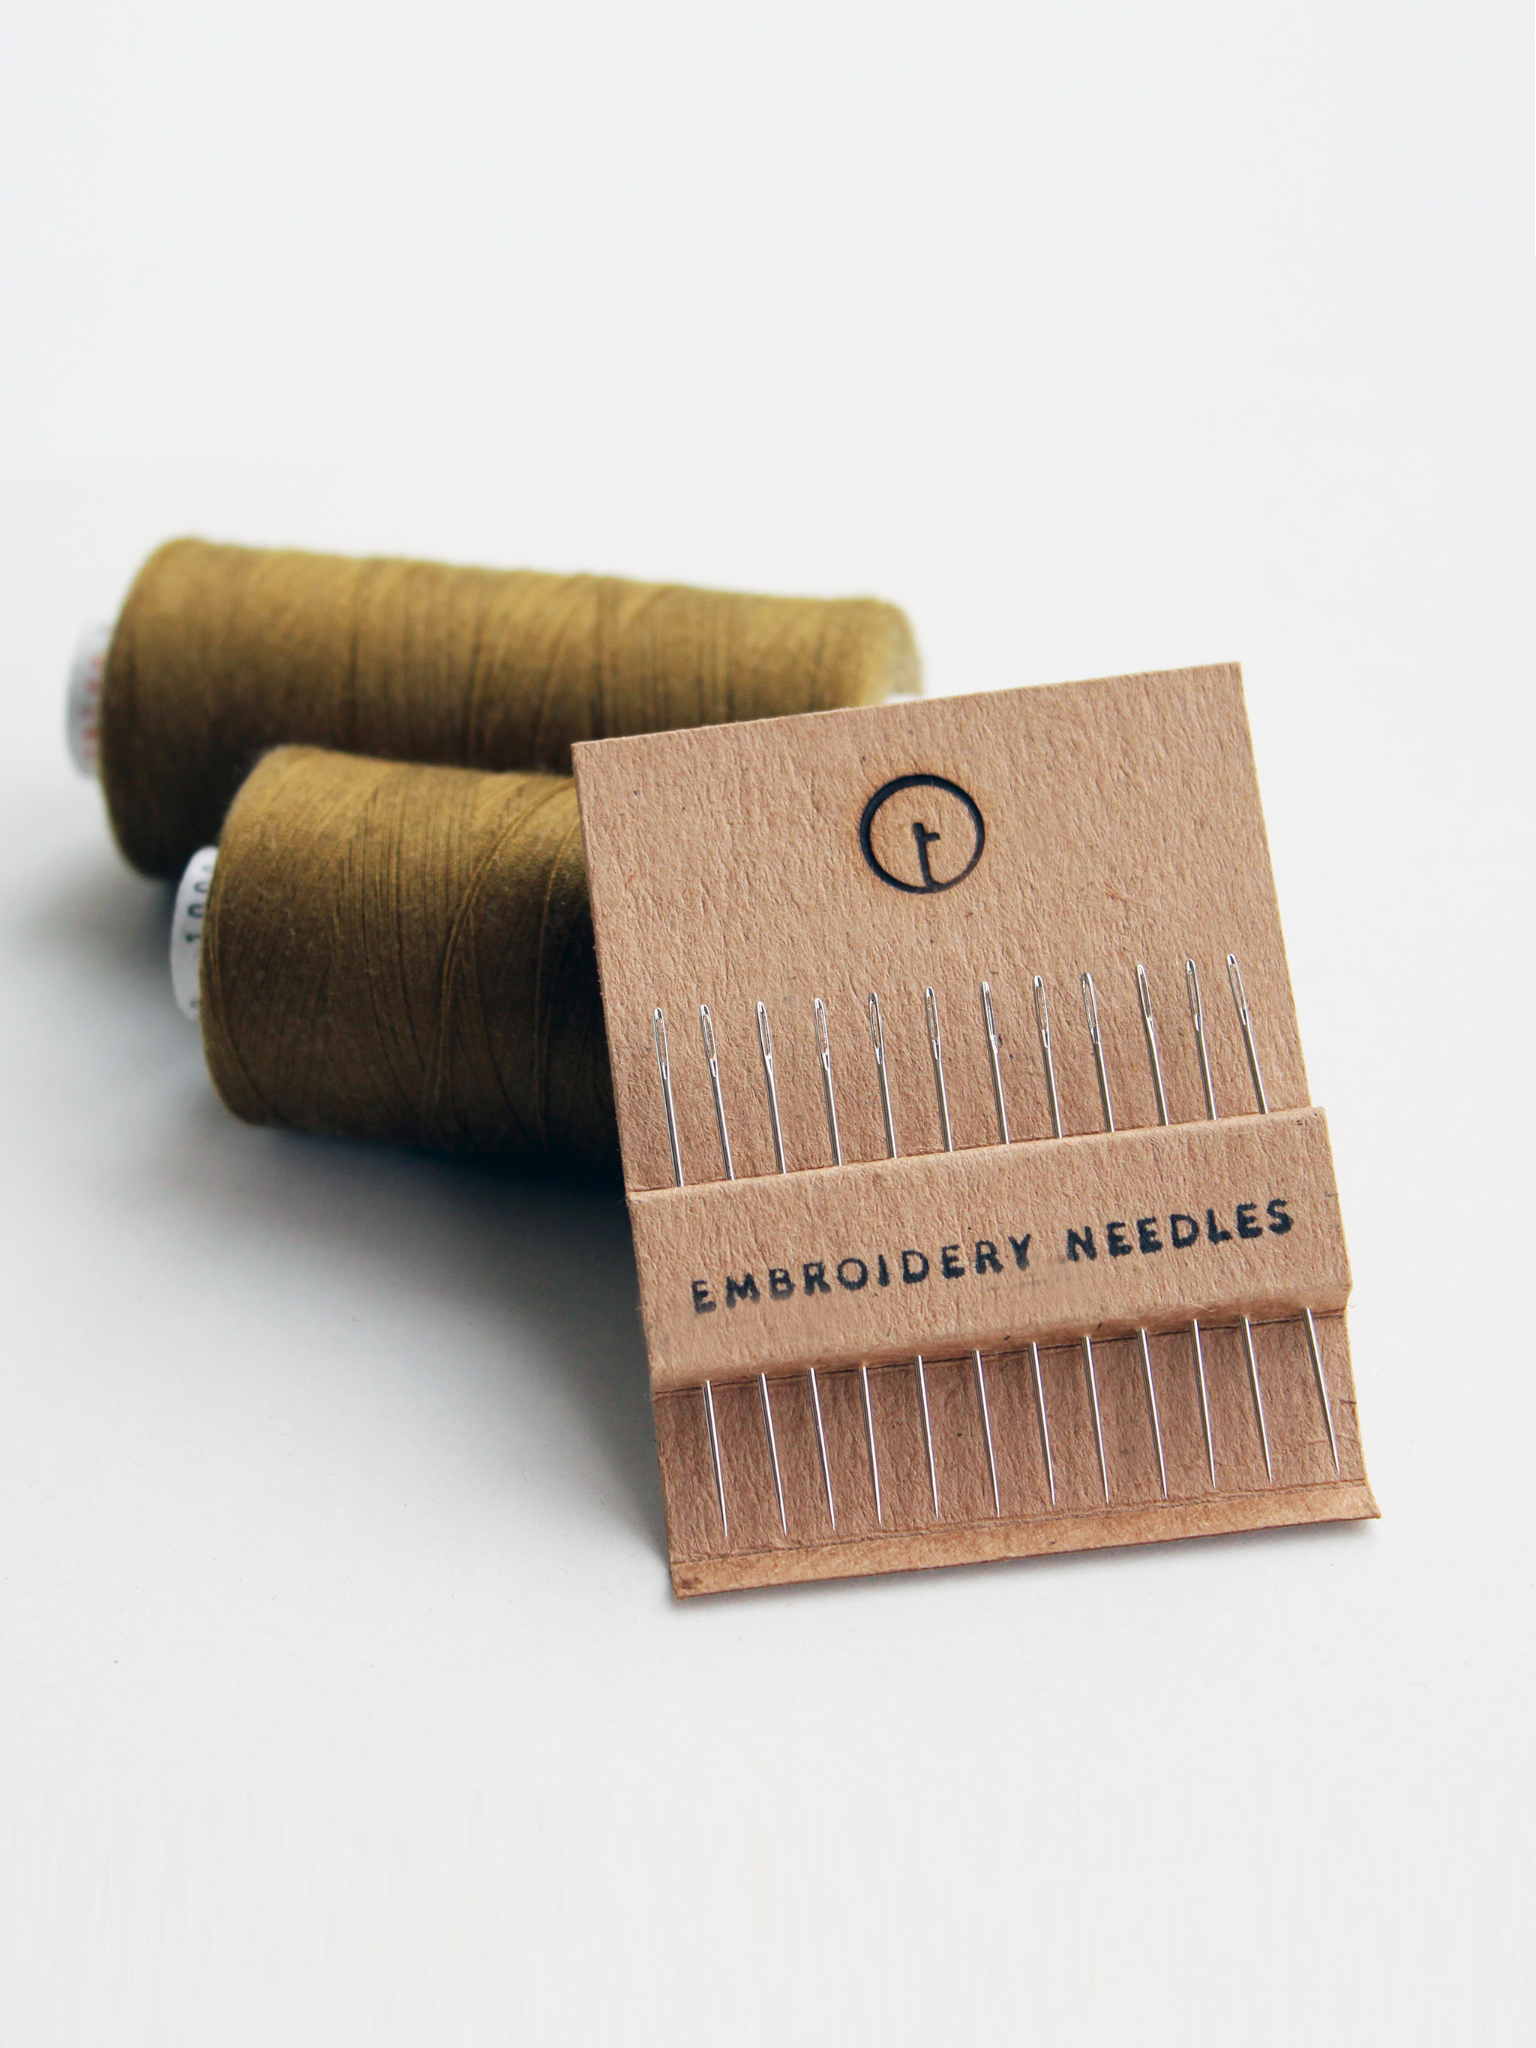 Embroidery Needles ∣ Sharpes Needles with long eye – toolly